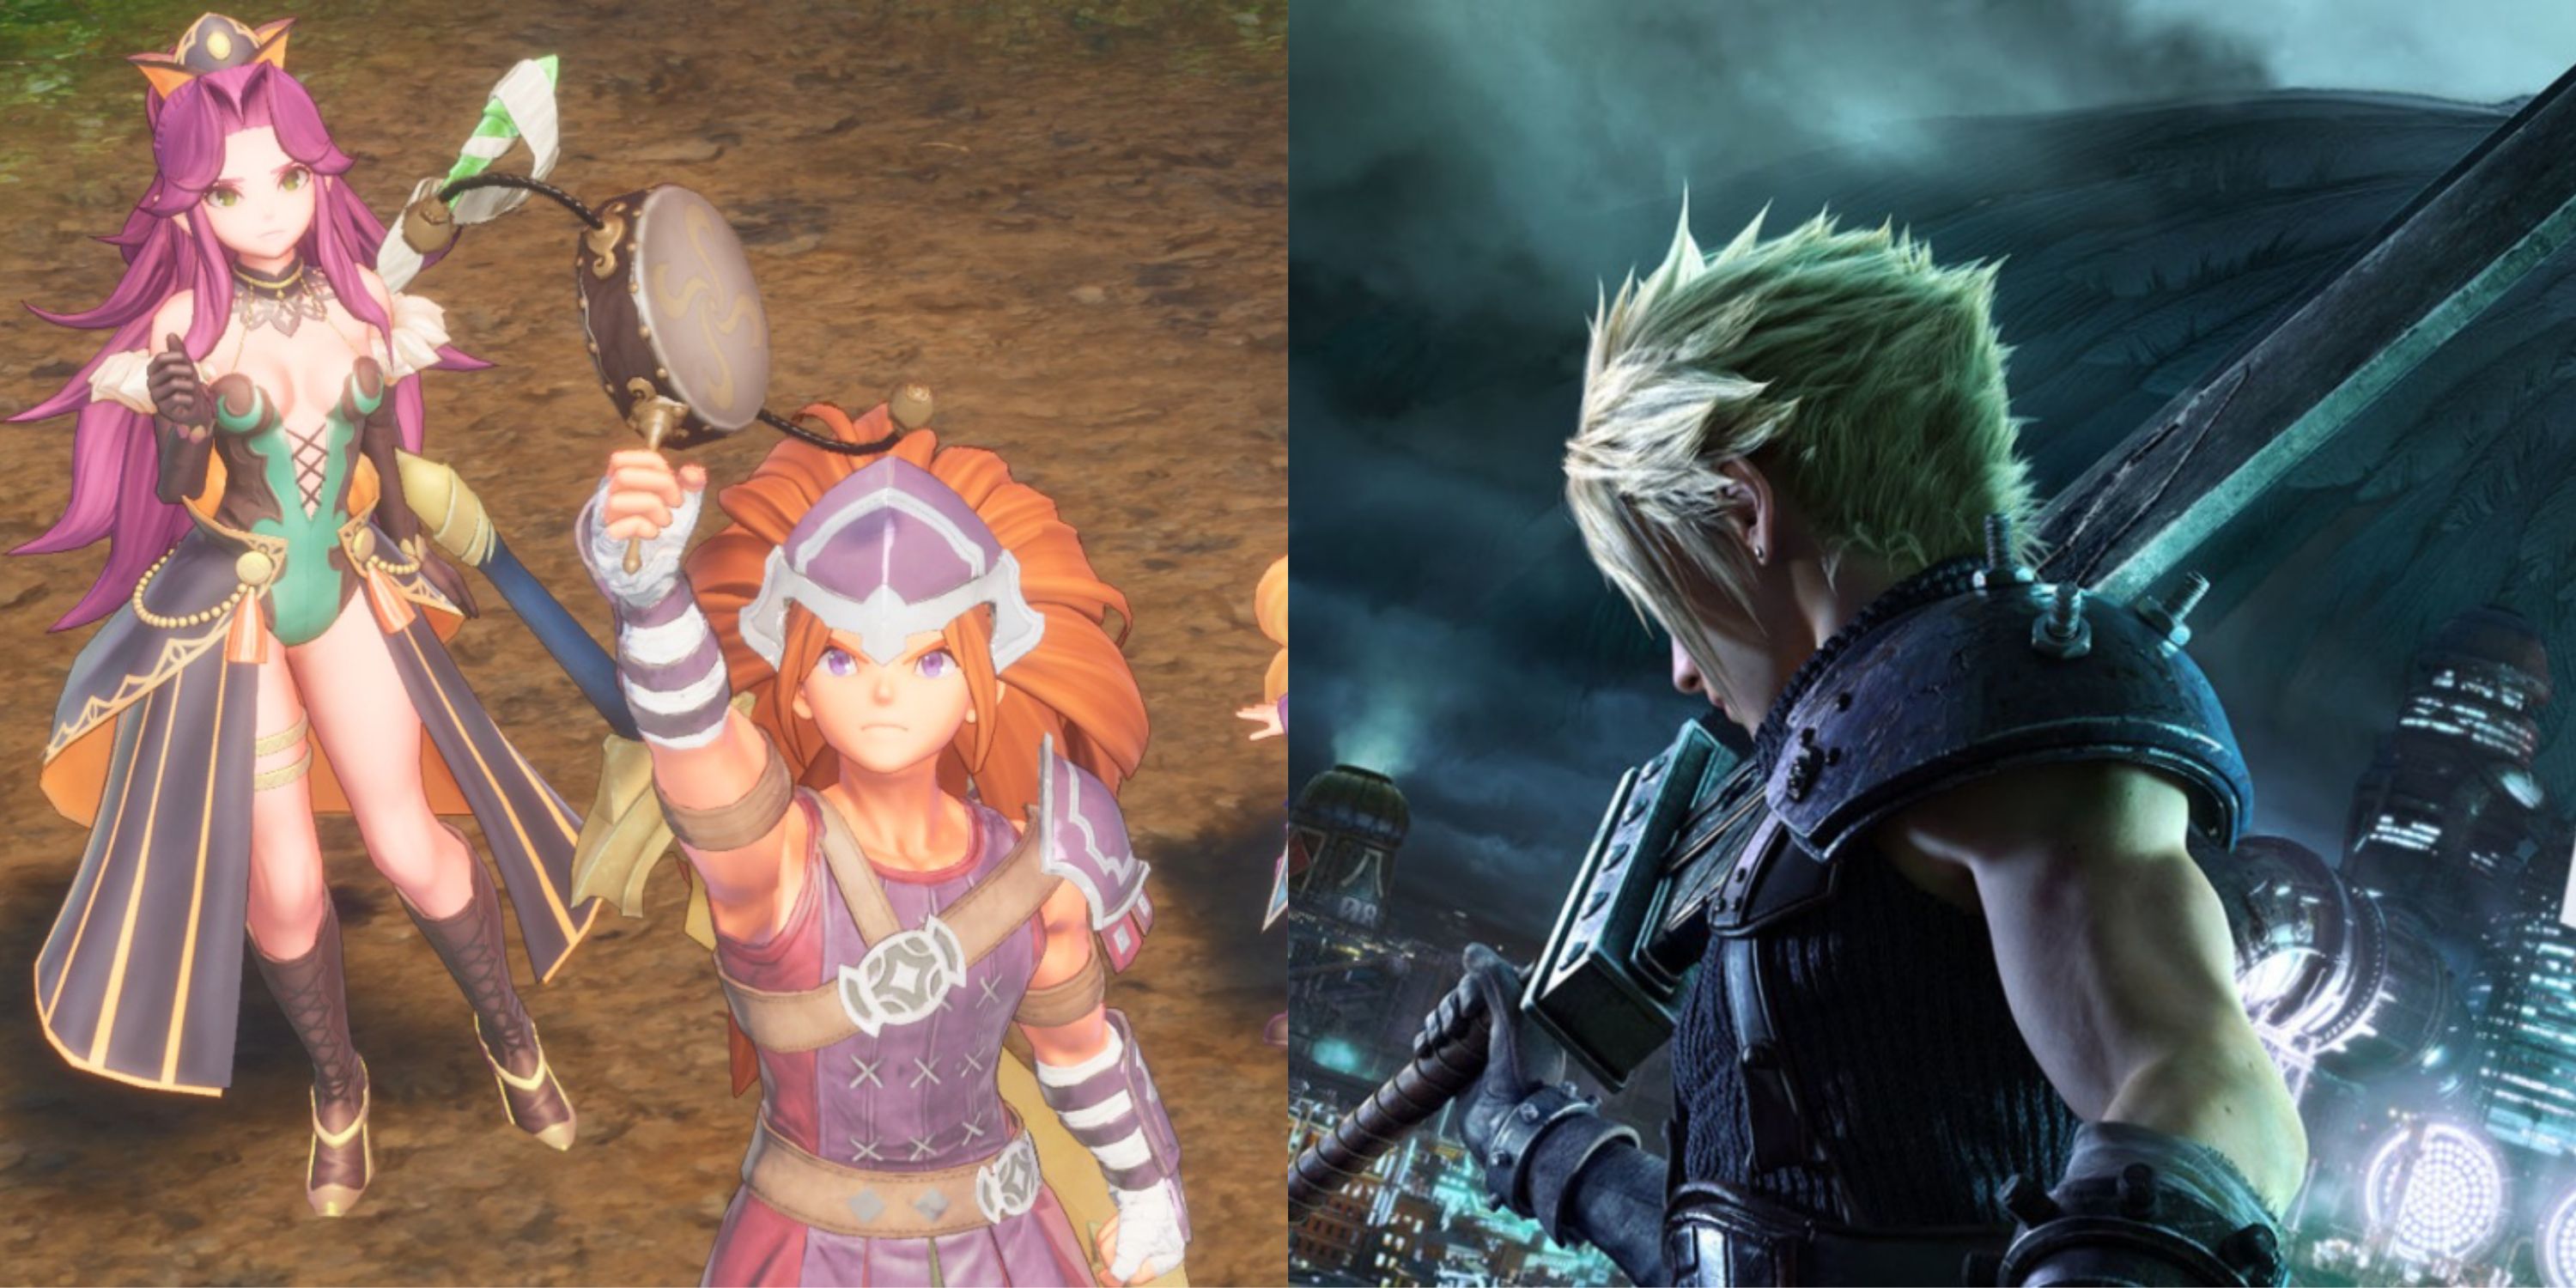 Featured image Angela and Duran in Trials of Mana and Cloud in Final Fantasy VII